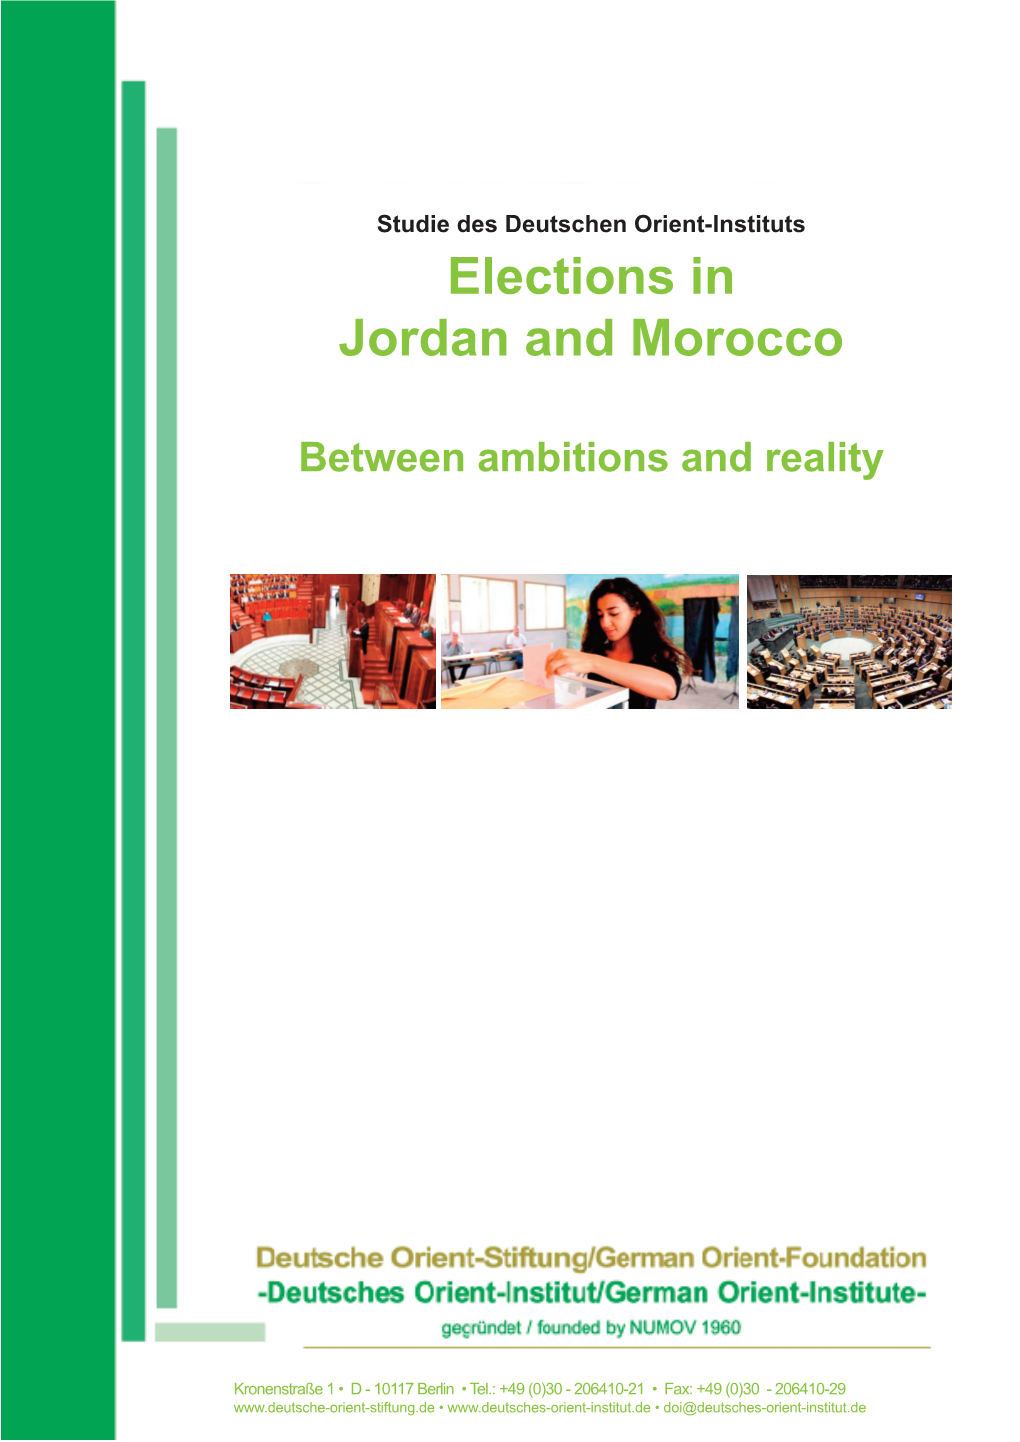 Elections in Jordan and Morocco